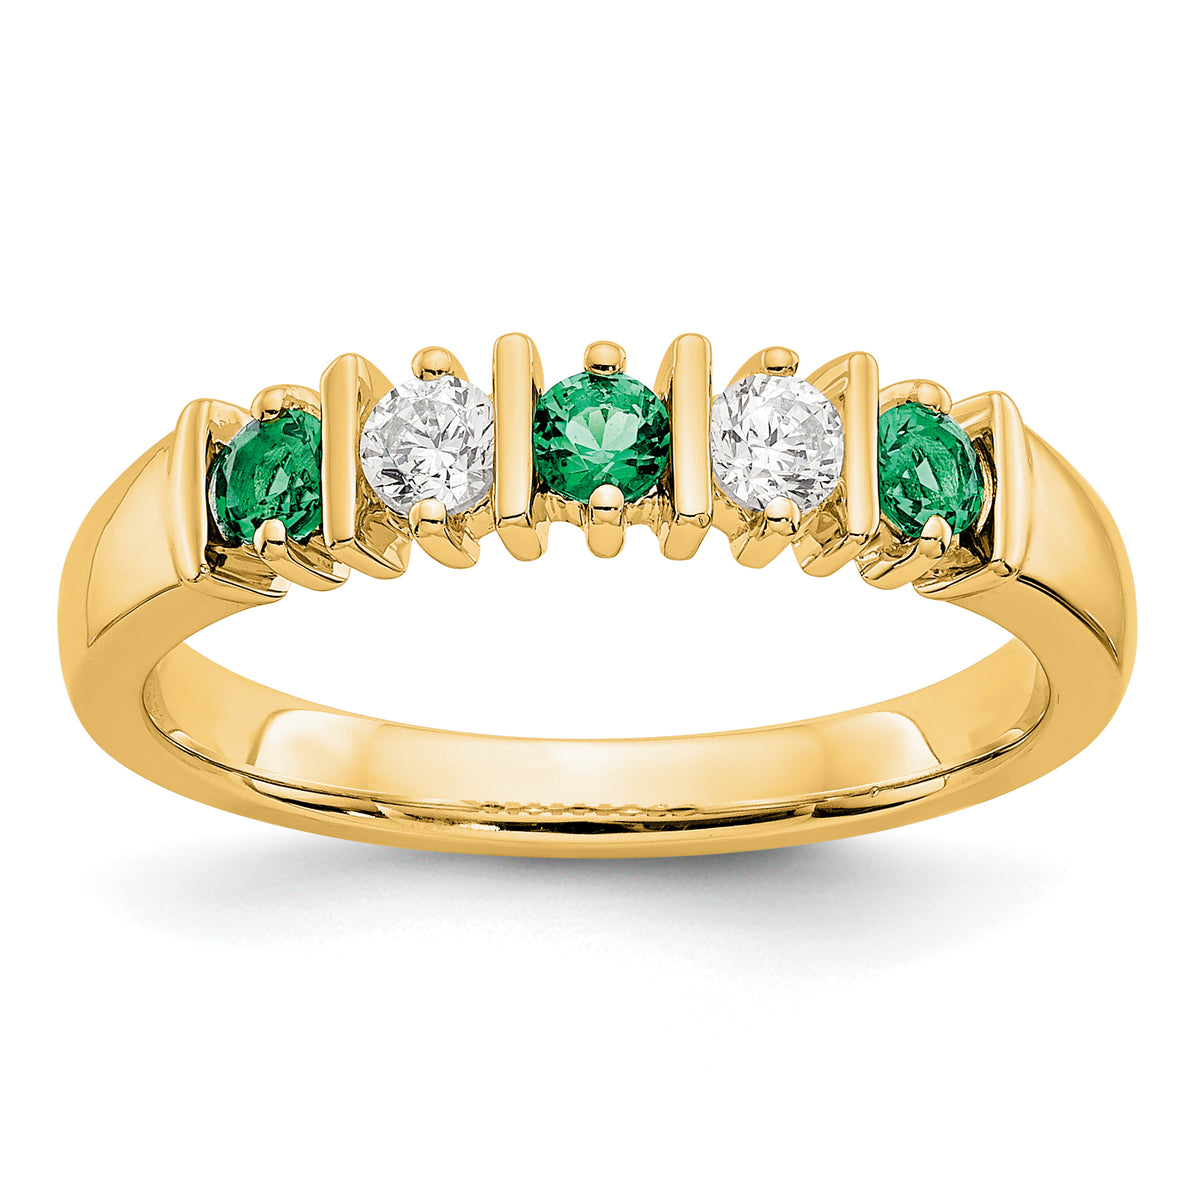 14K Yellow Gold 1/5 carat Diamond and Emerald Complete Band